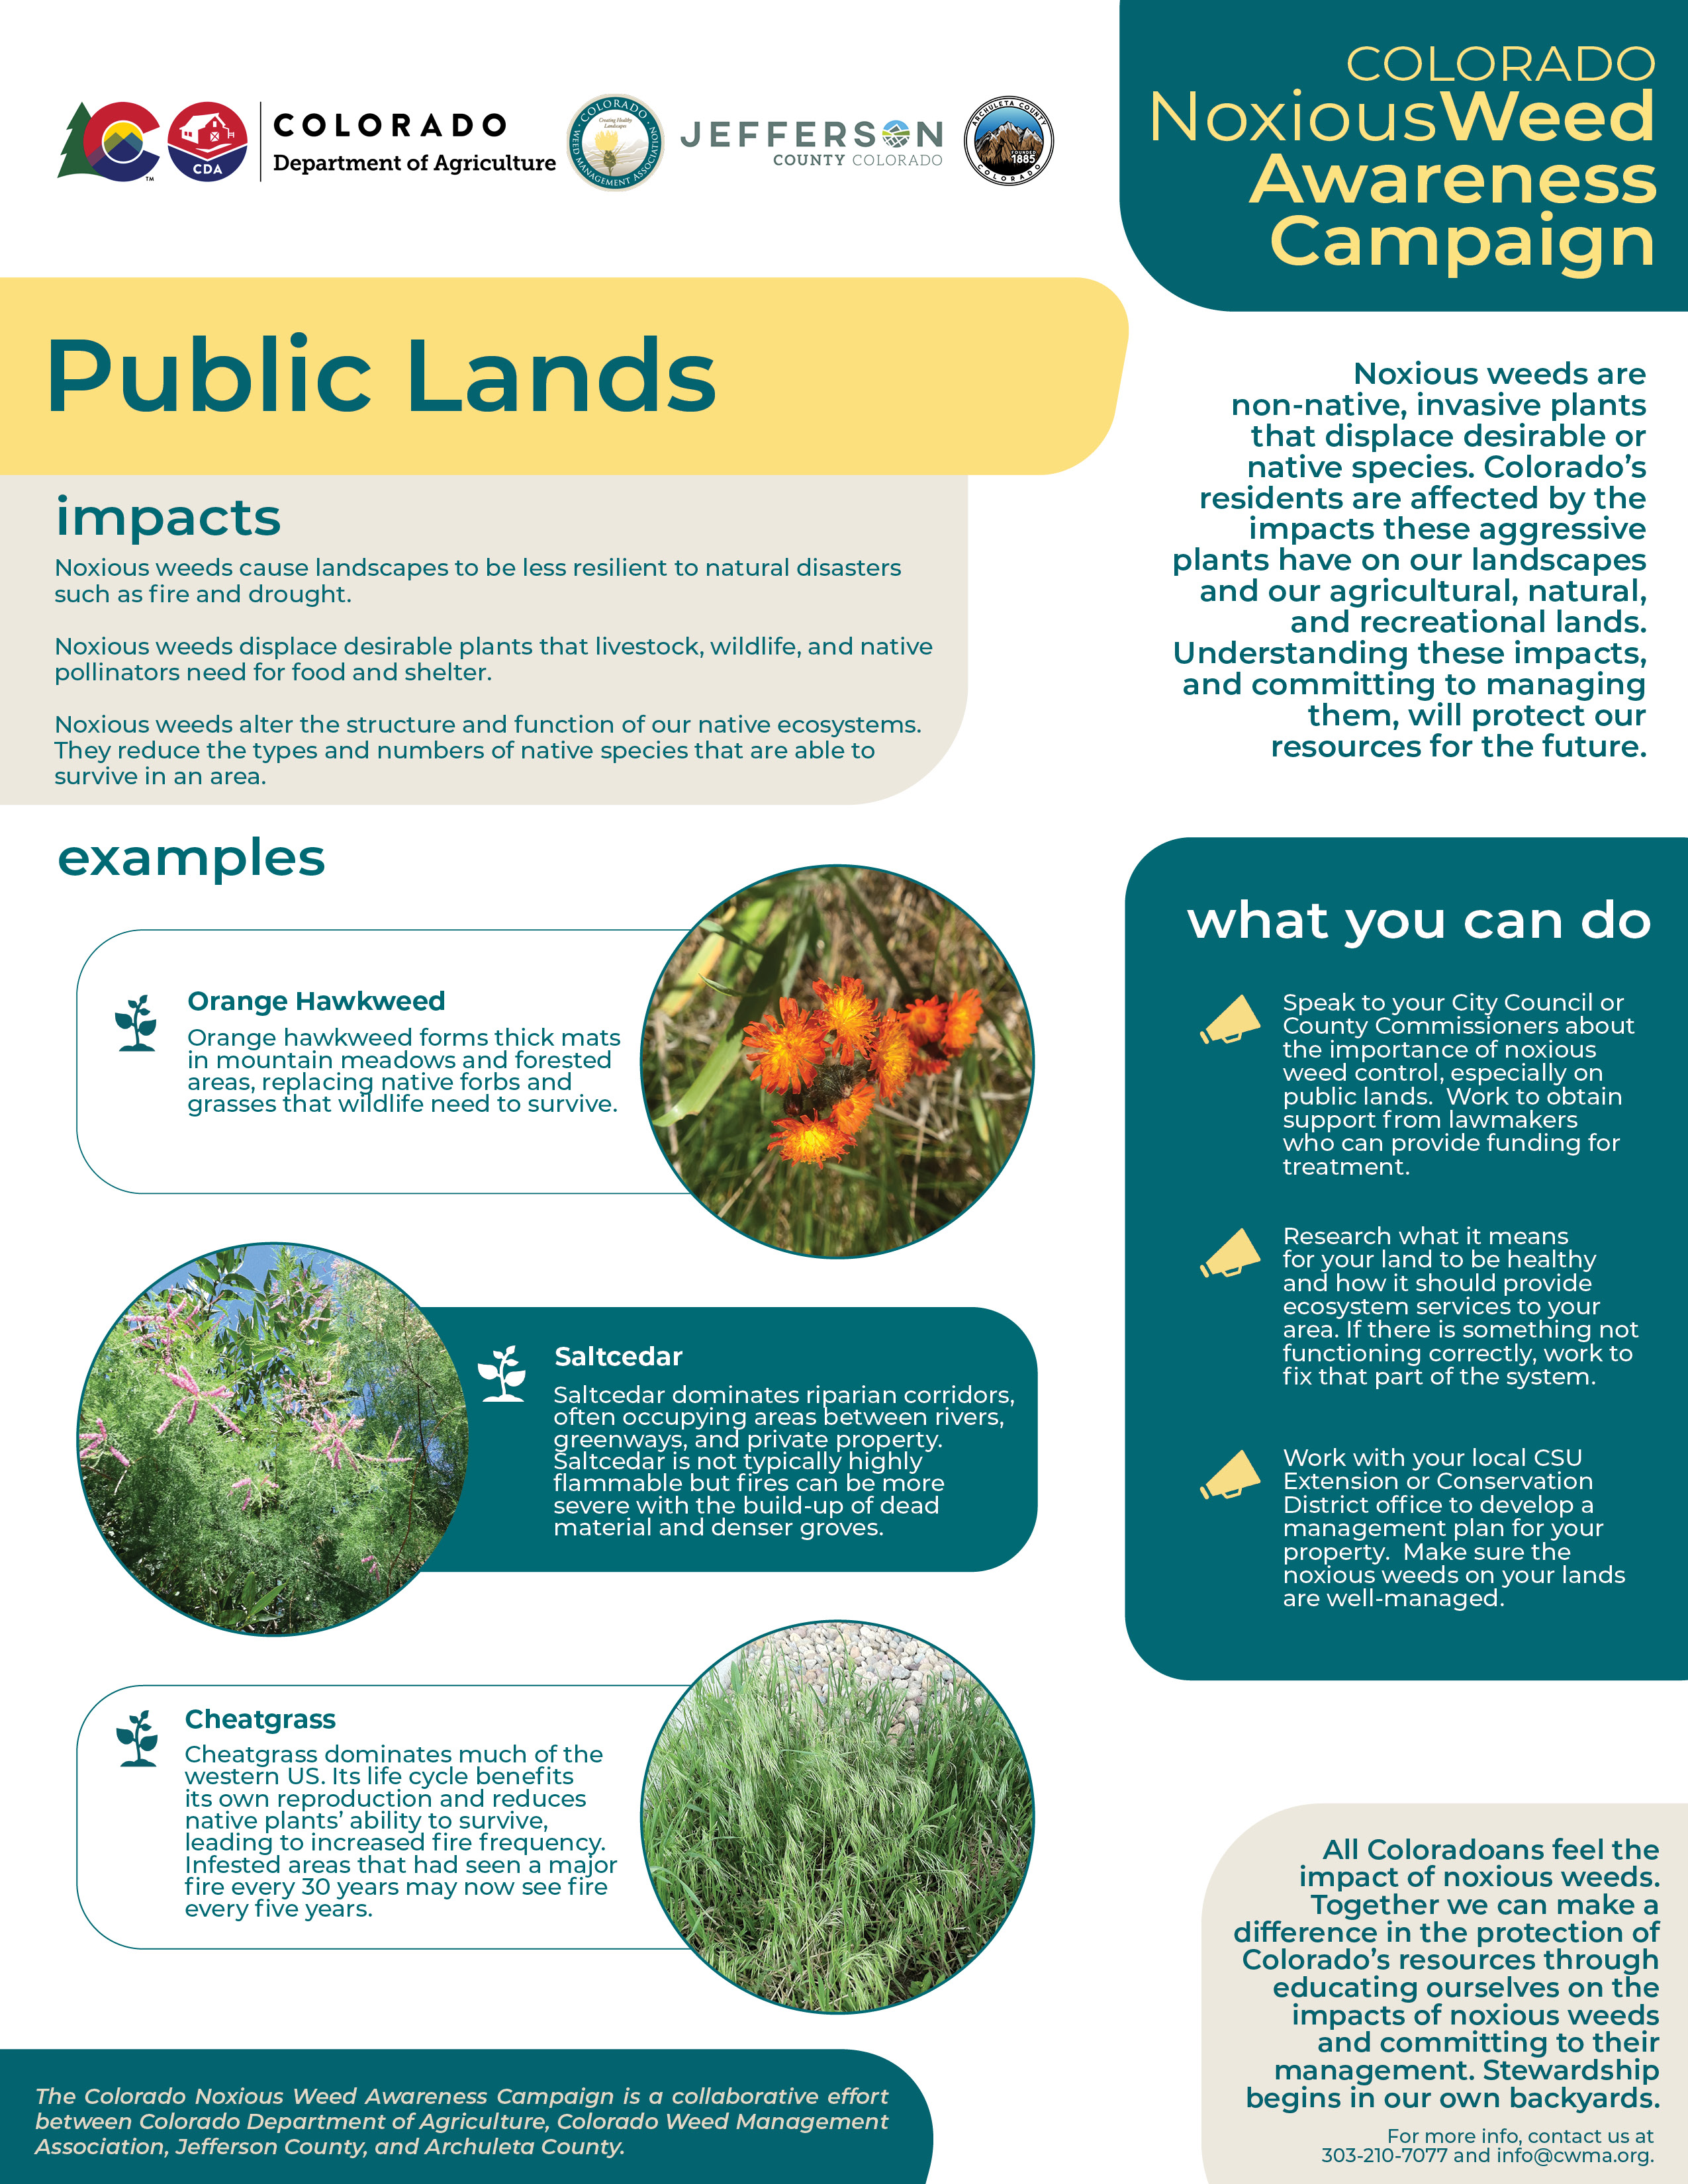 Graphic of information about managing noxious weeds on on public lands.